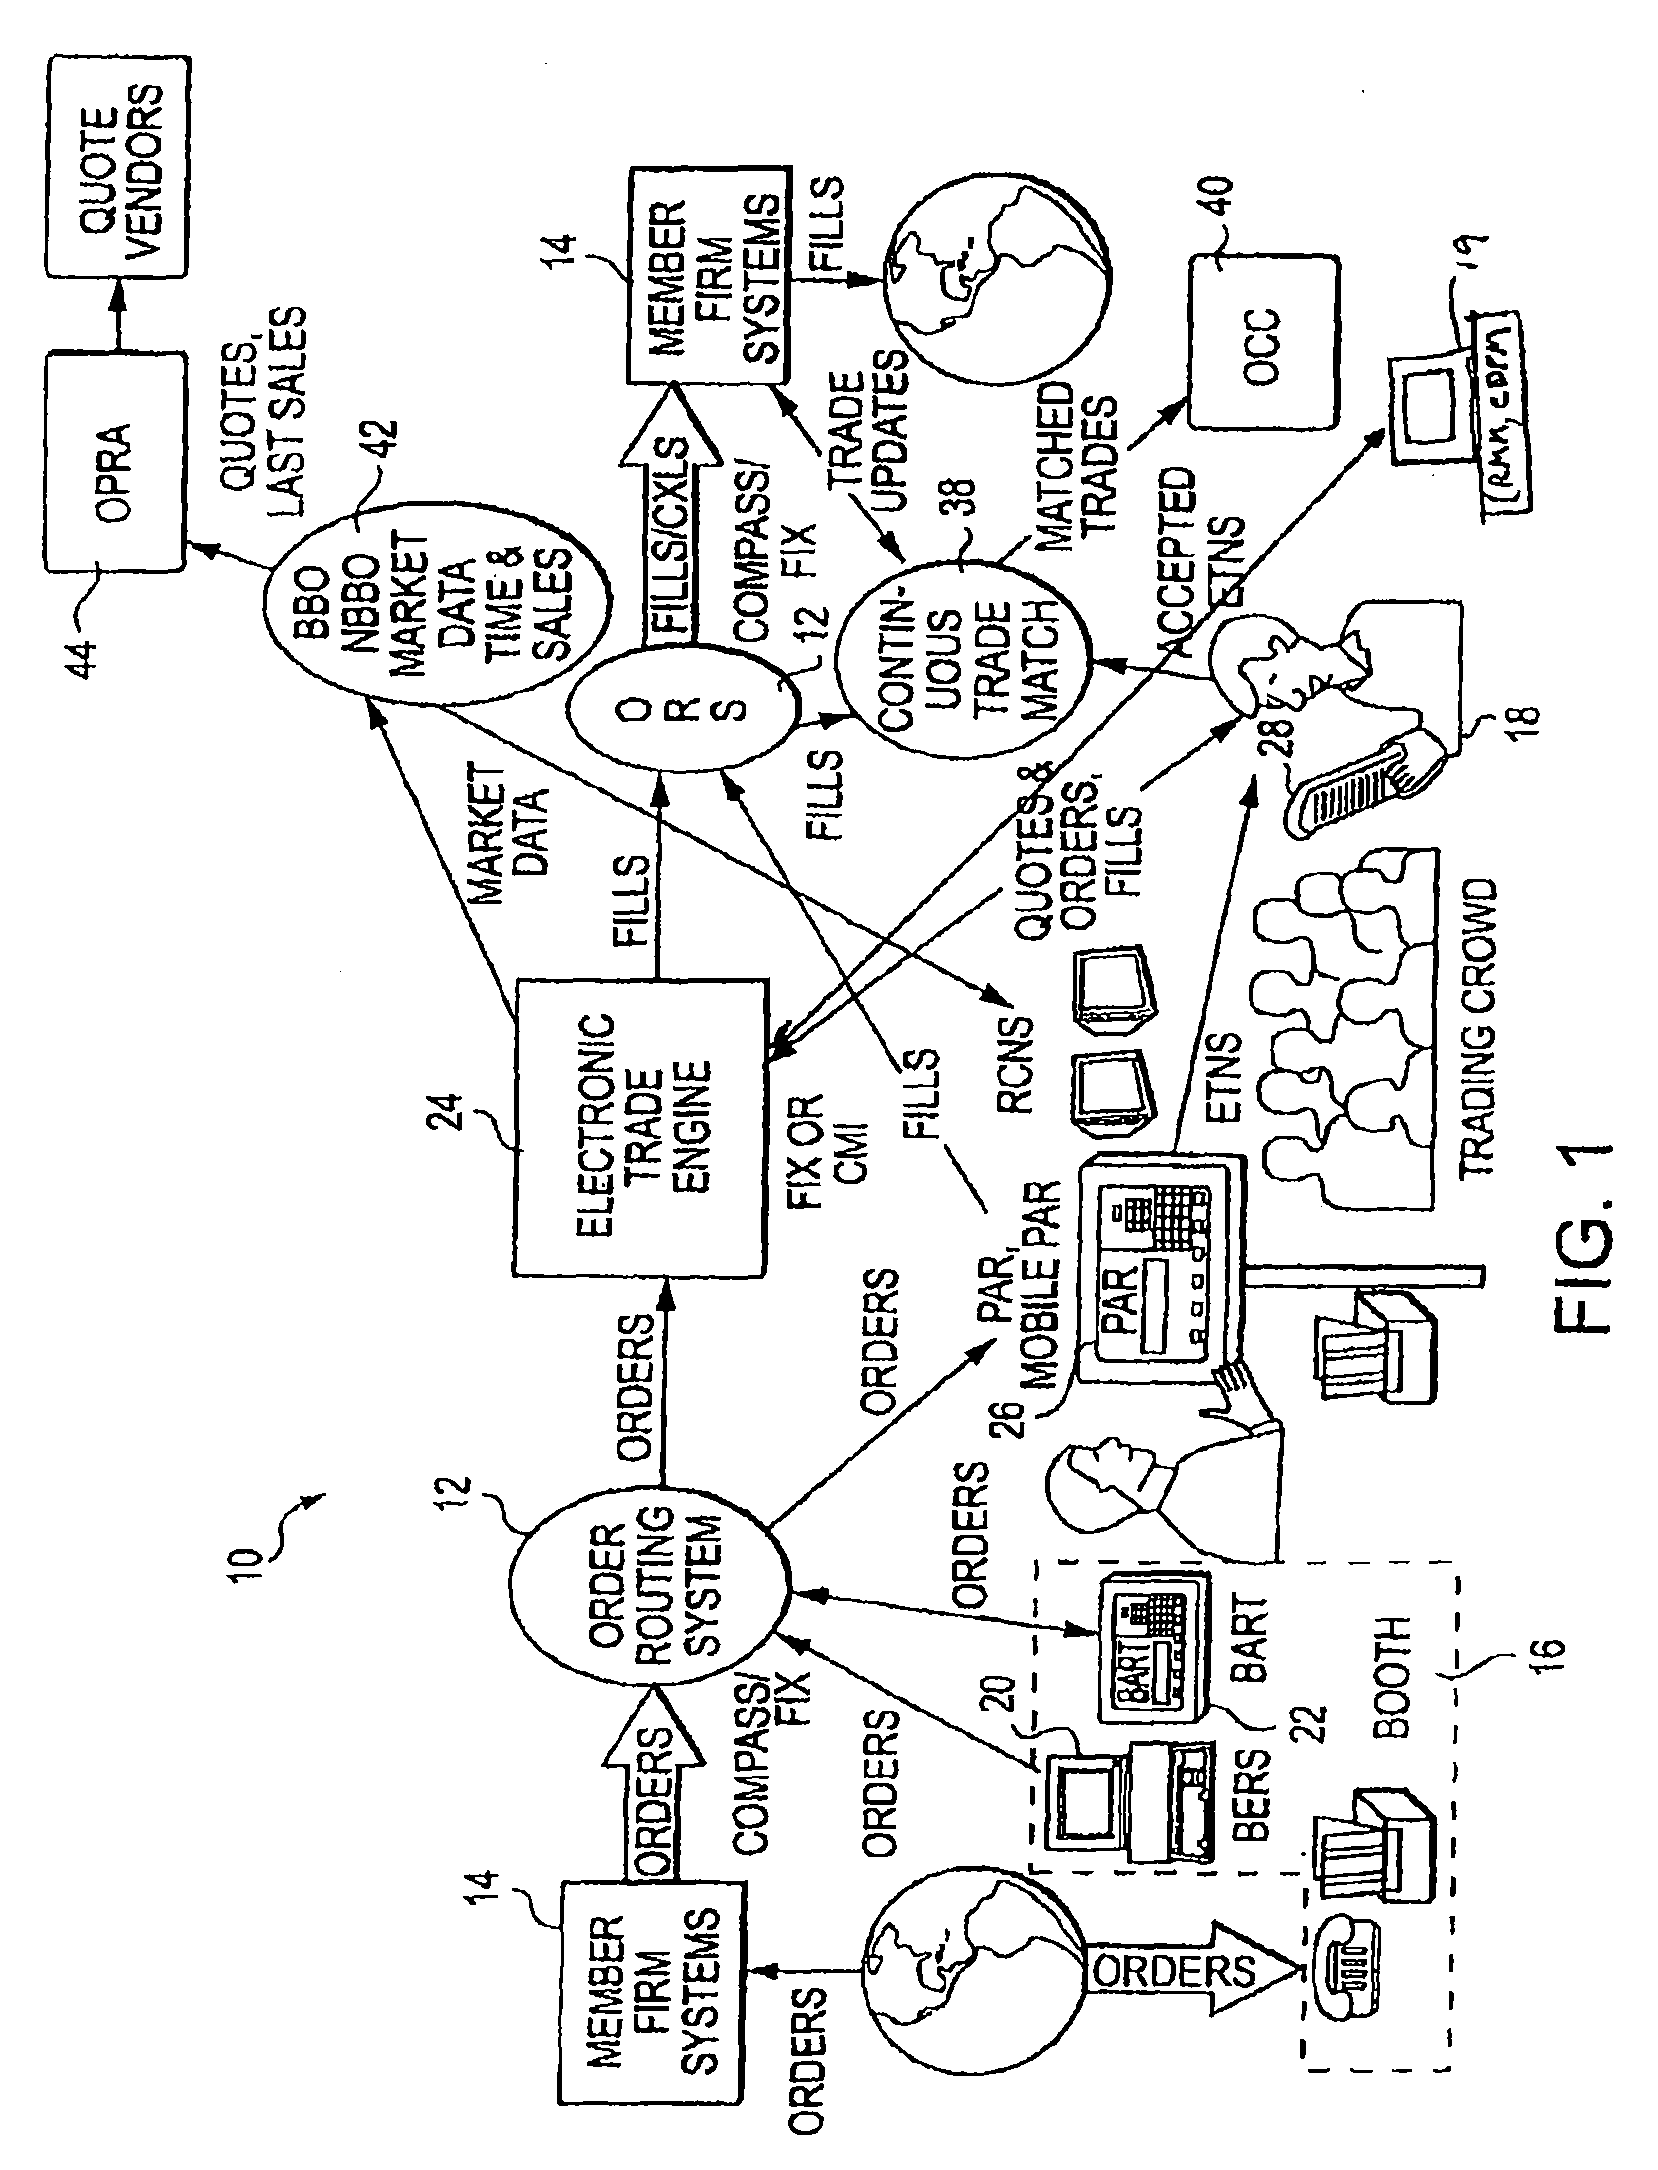 Exchange trading system and method having a modified participation entitlement